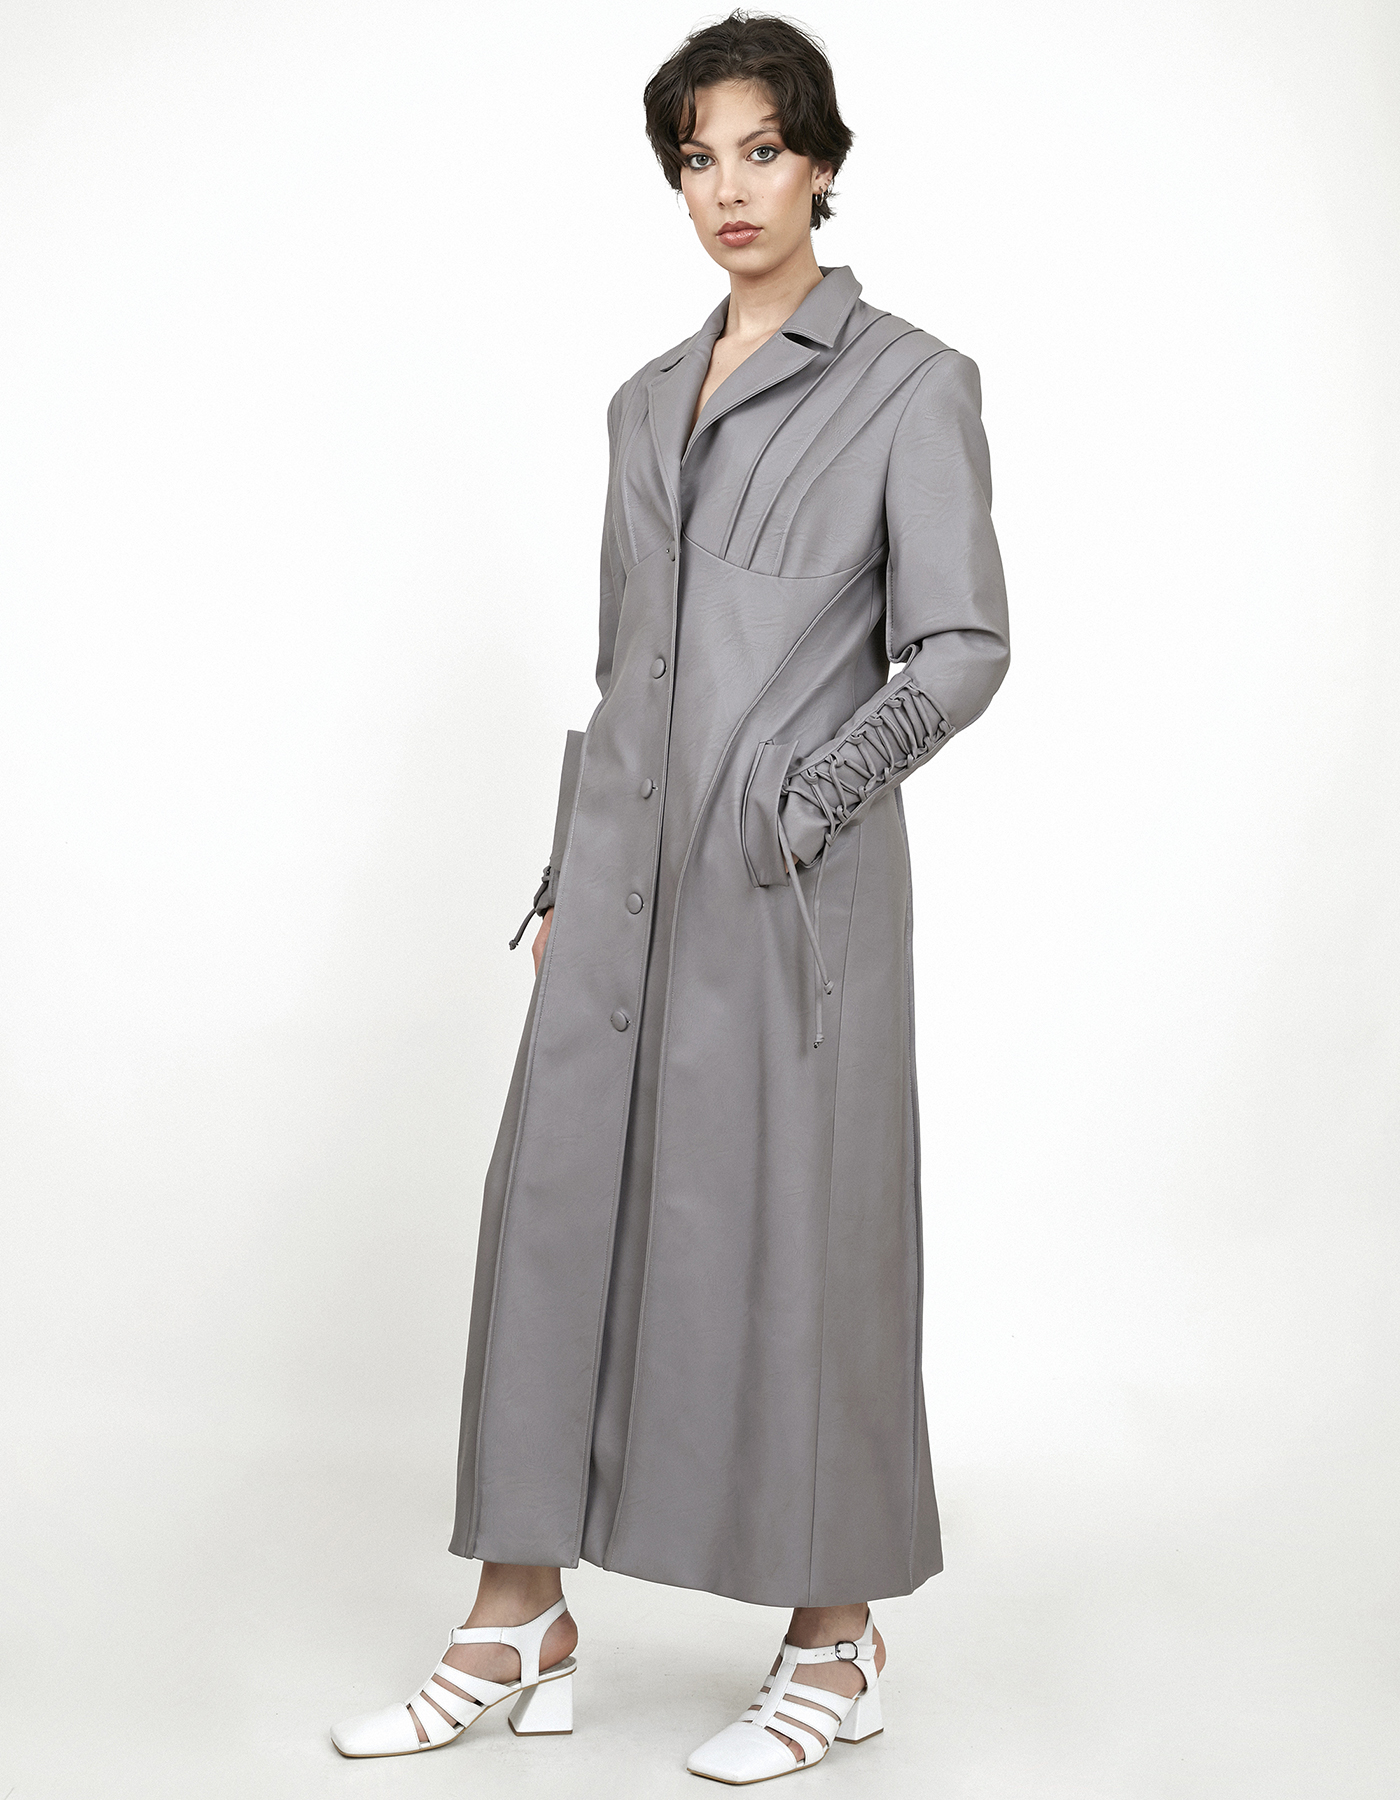 GRAY FAUX LEATHER TRENCH COAT